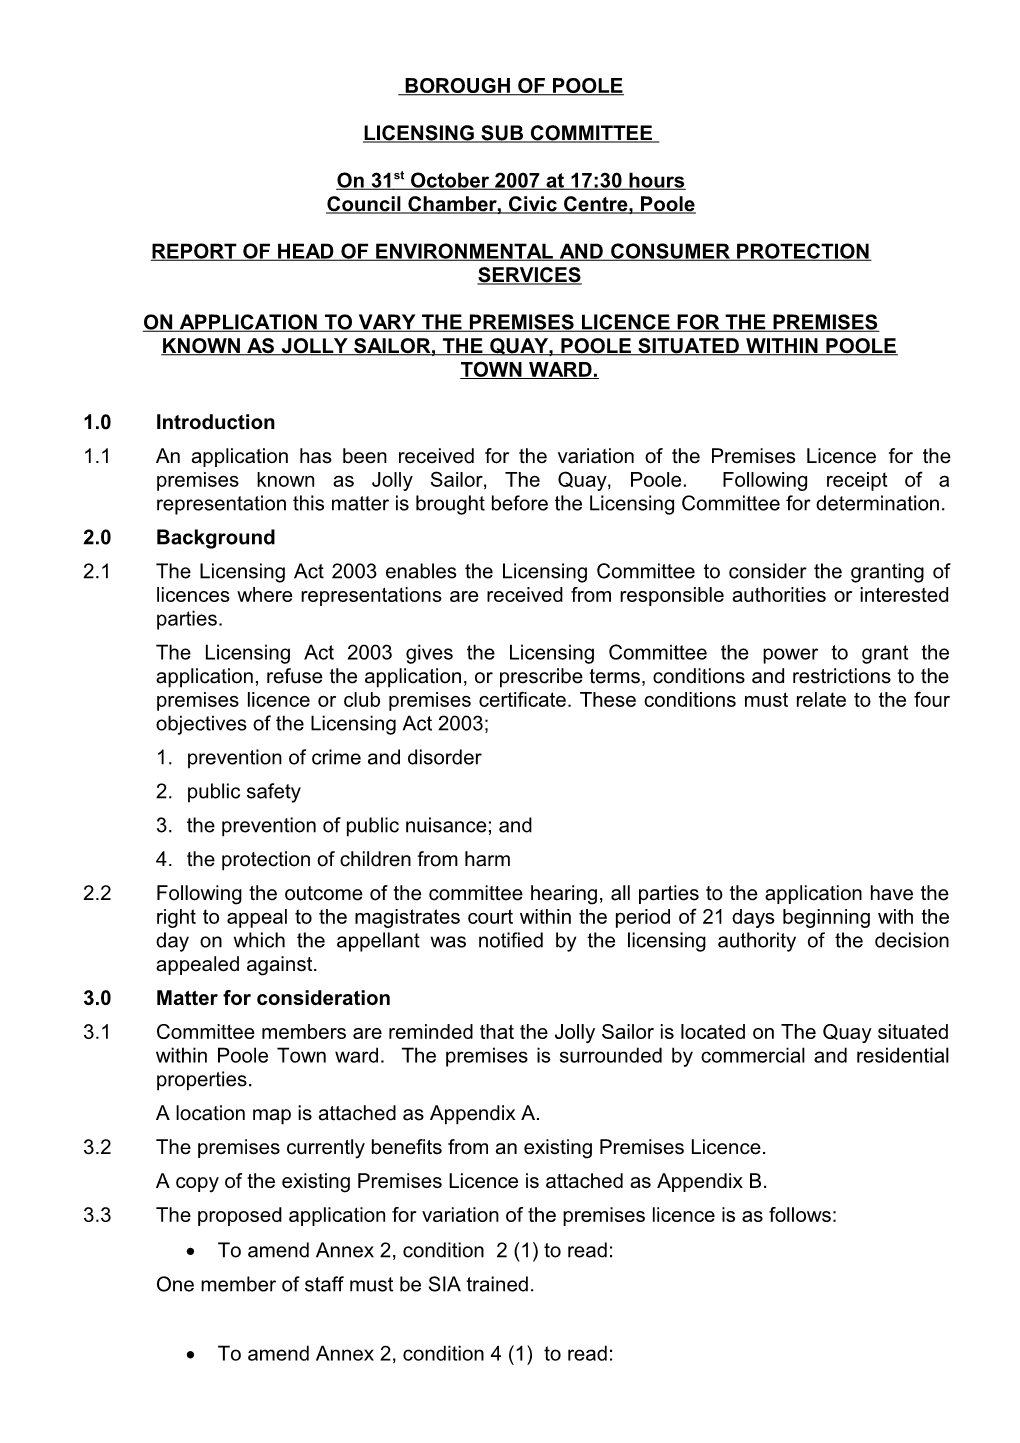 Application to Vary the Premises Licence for the Premises Known As Jolly Sailor, the Quay